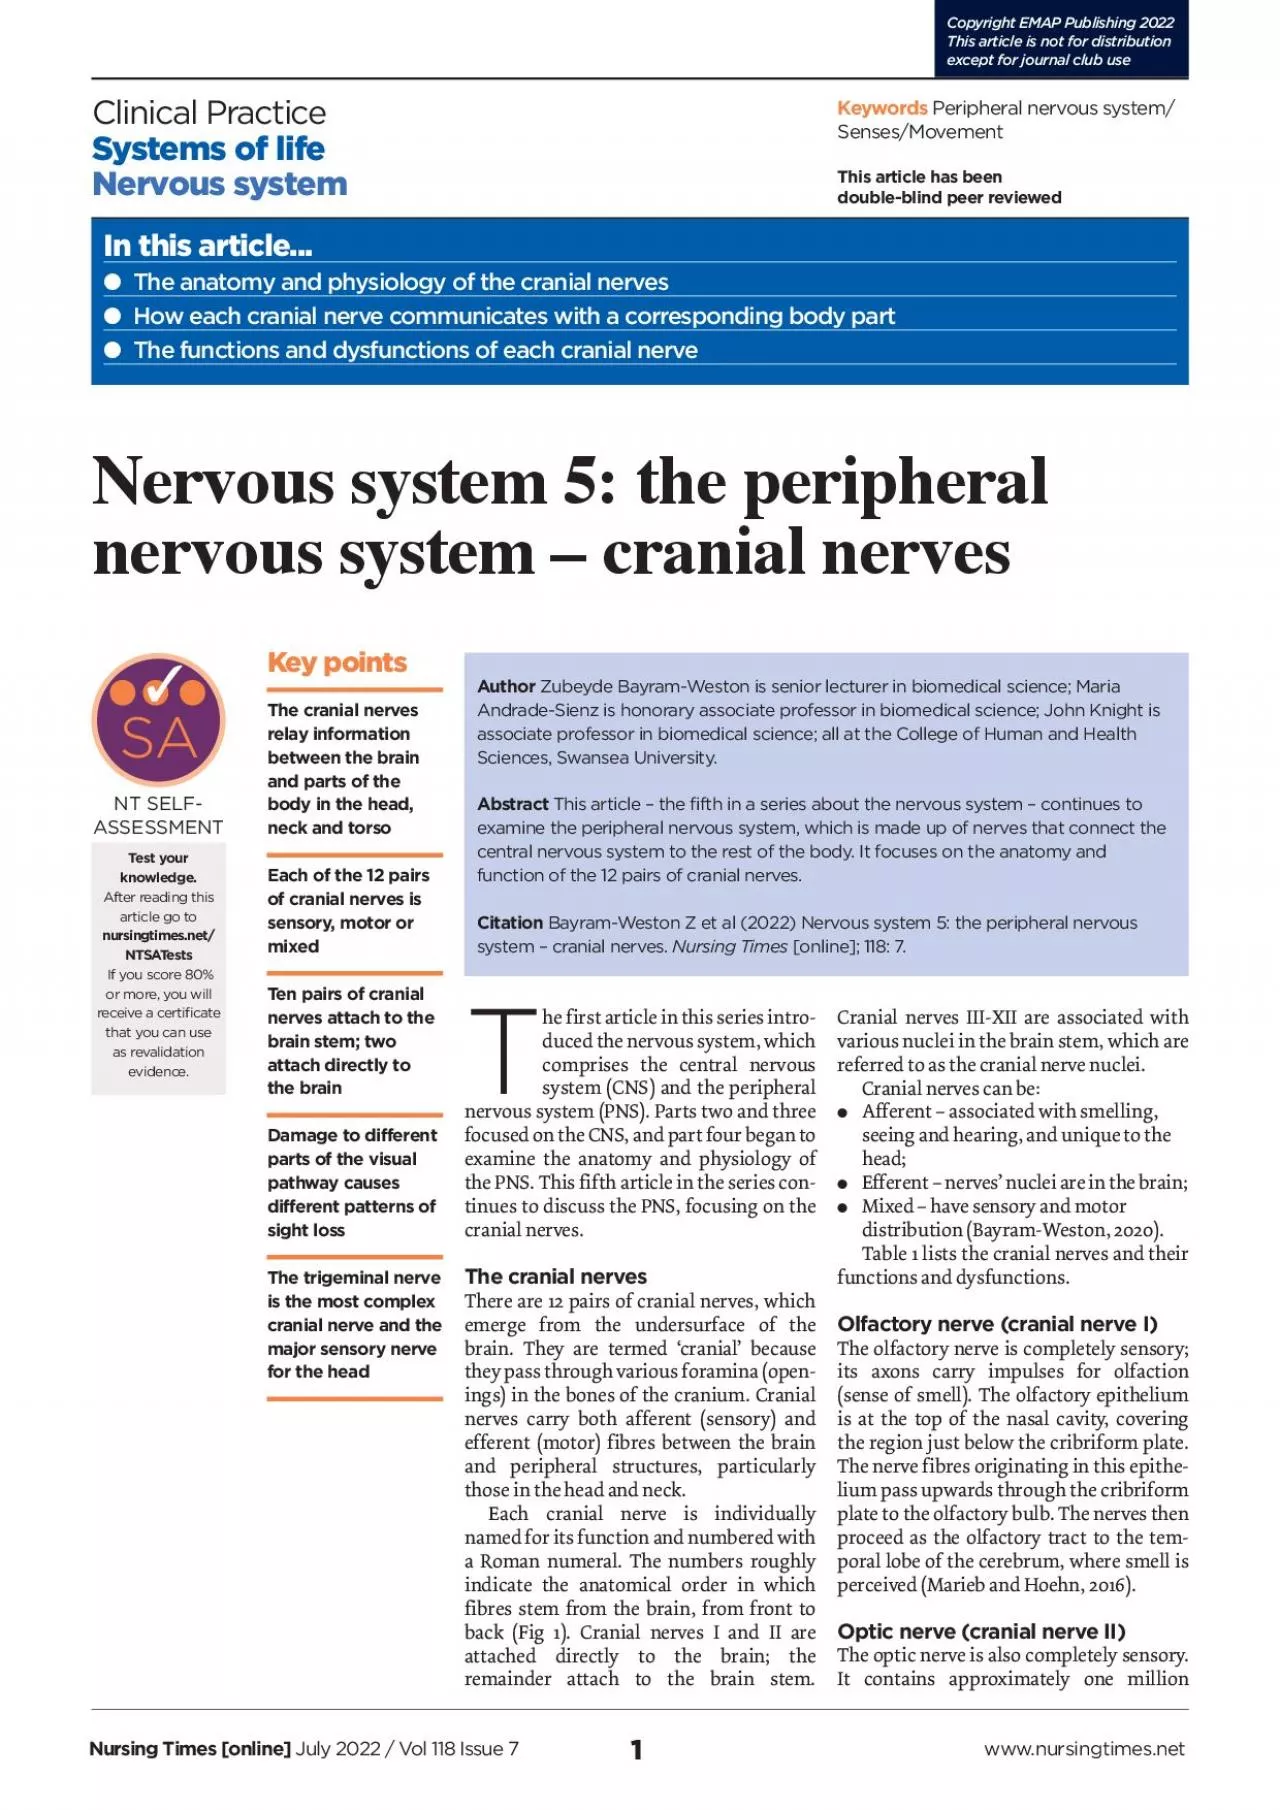 duced the nervous system which comprises the central nervous system